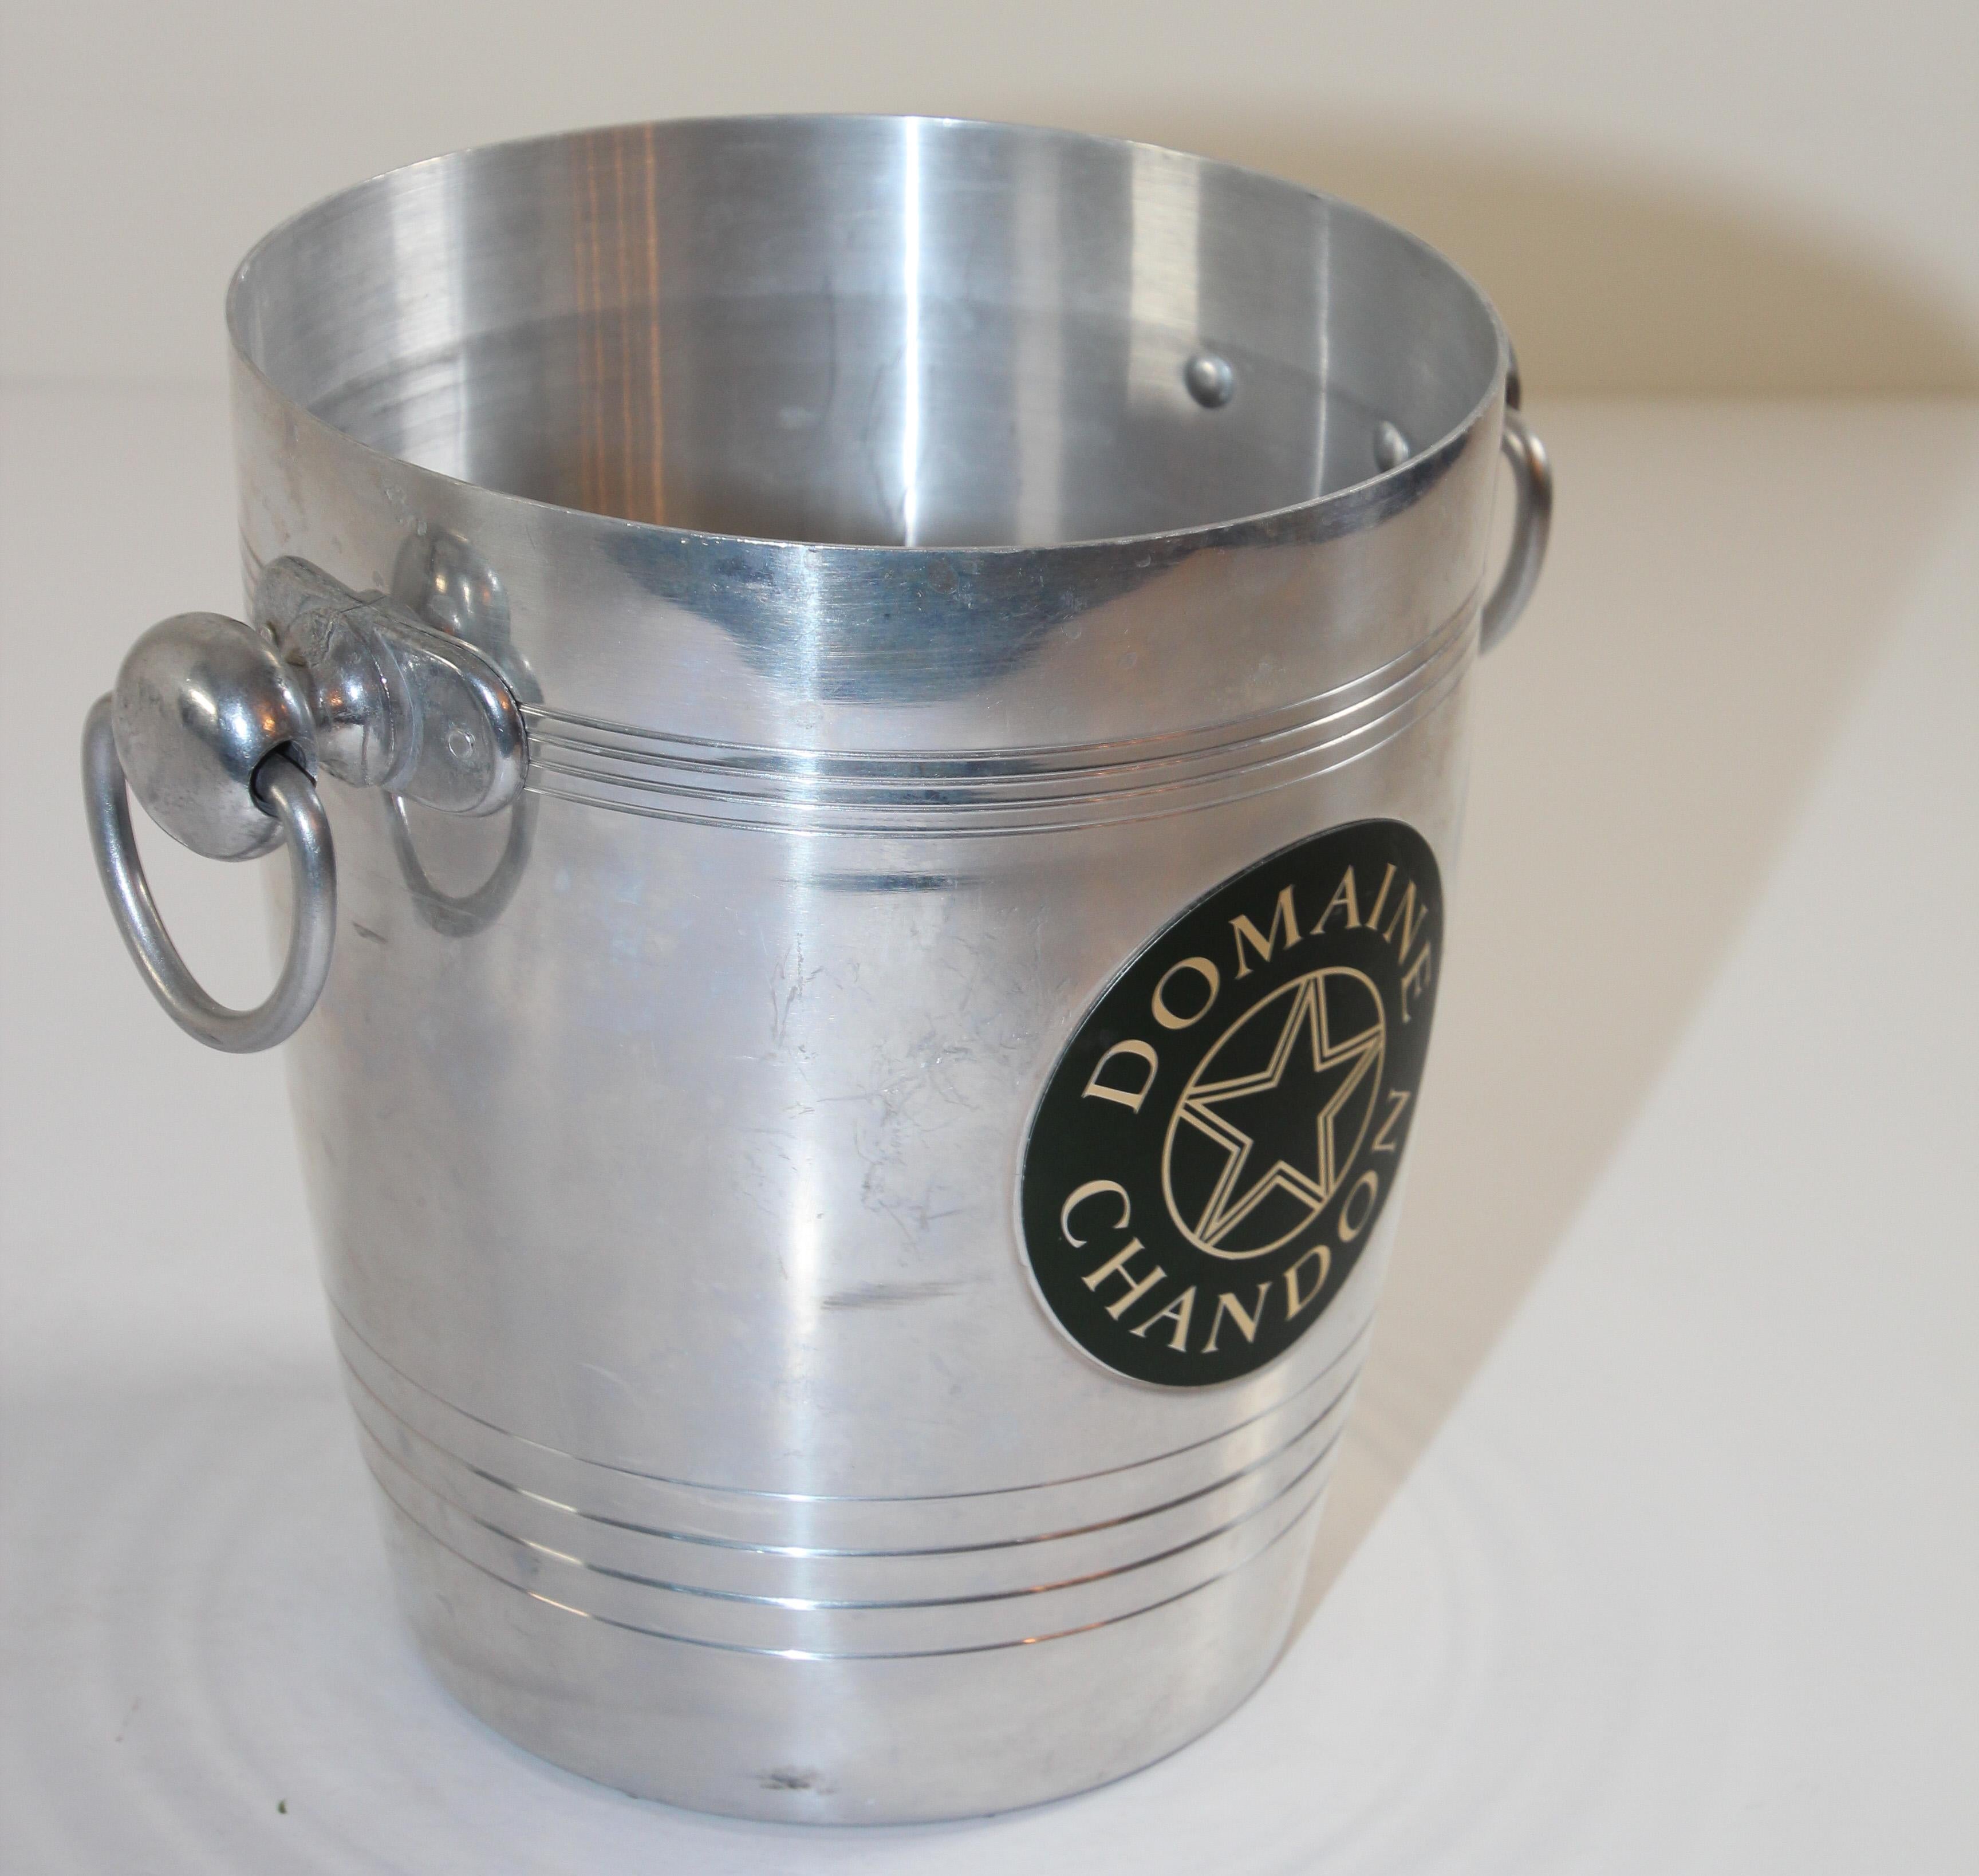 Details about   Chandon Wine Champagne Ice Bucket Rare VHTF Acrylic 